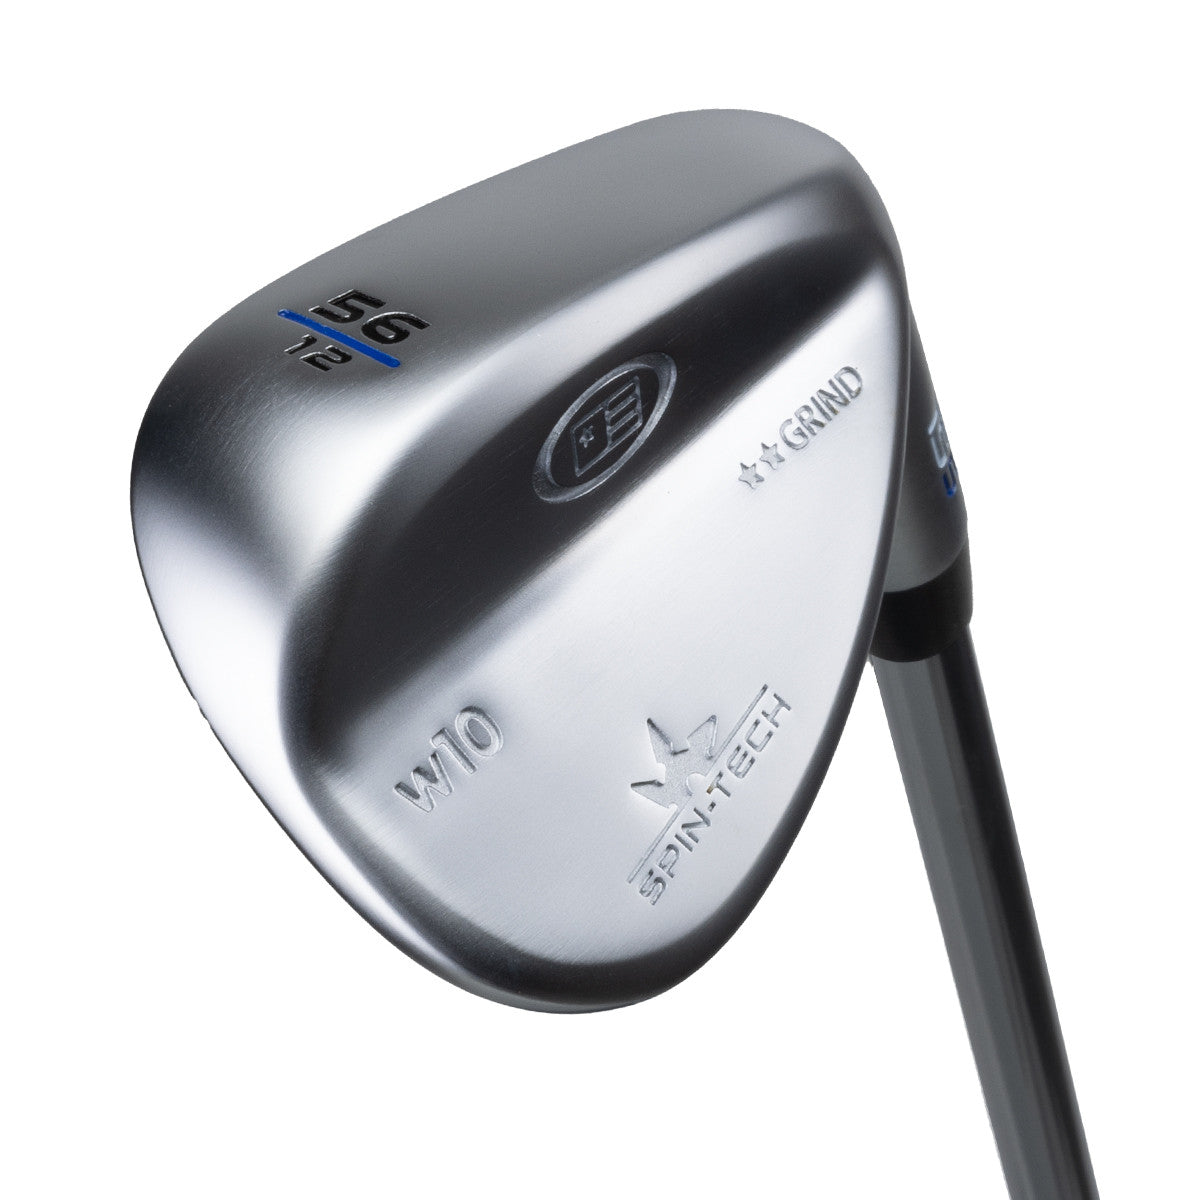 US Kids TS5 Spin Tech Golf Wedges Graphite Shafts